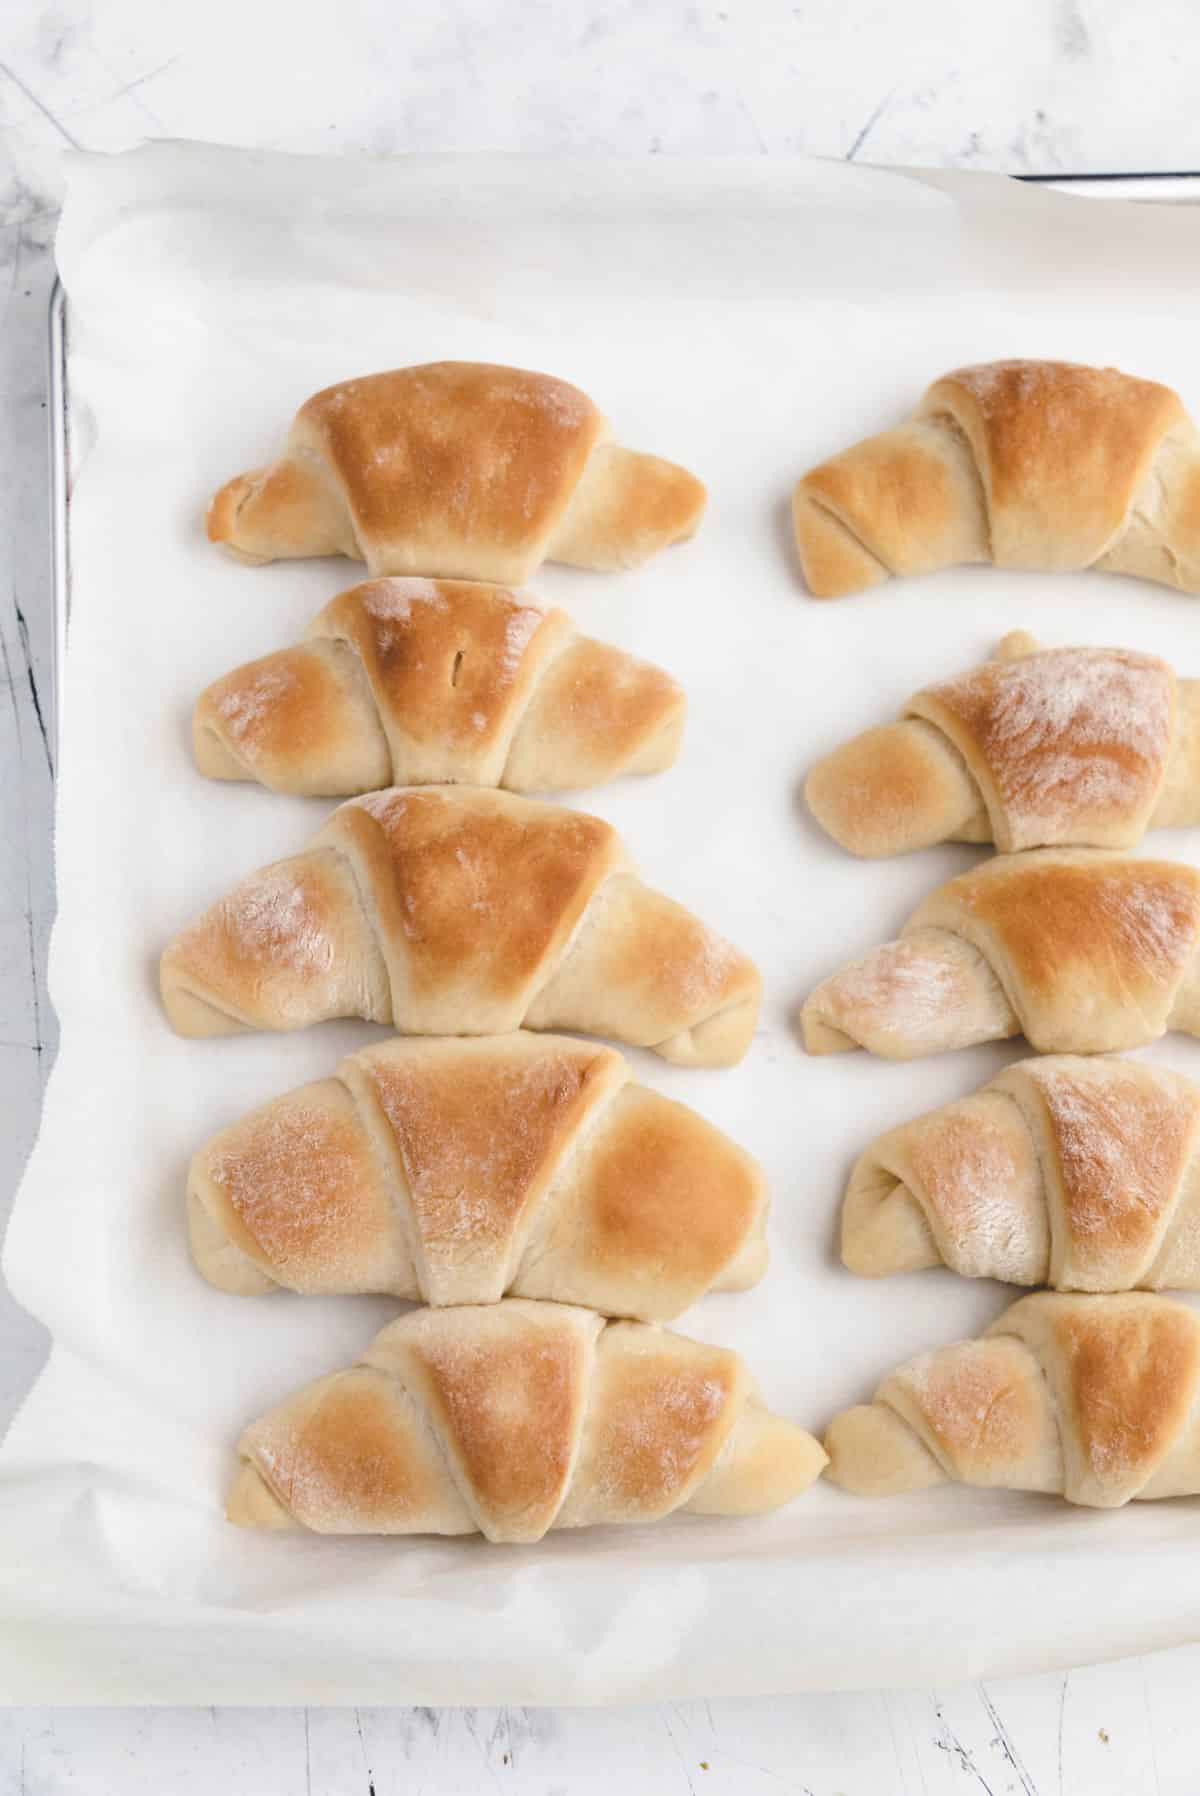 Baked crescent rolls in rows on a tray.